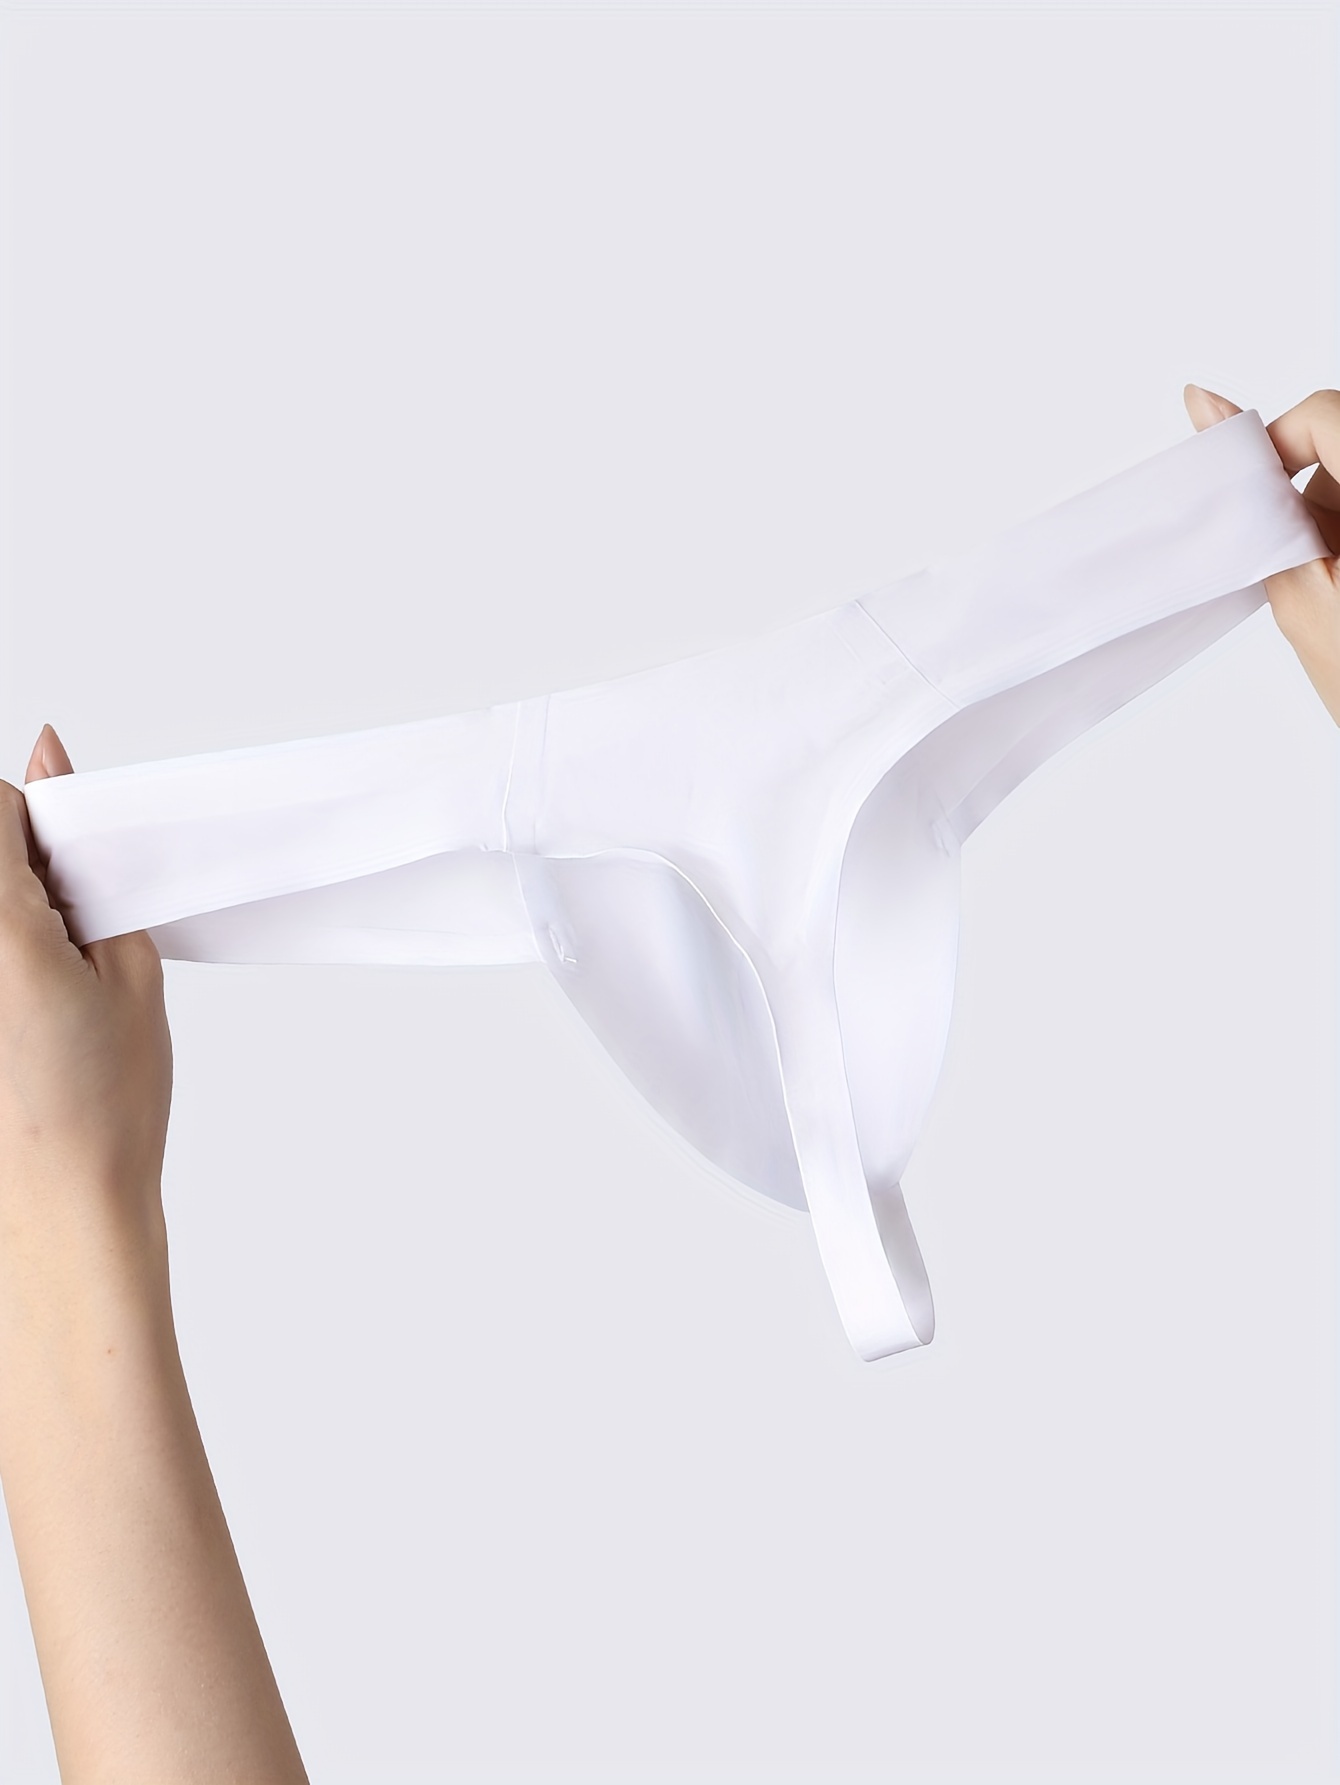 New Sexy Ice Silk Seamless Underwear Thong Low Rise Breathable